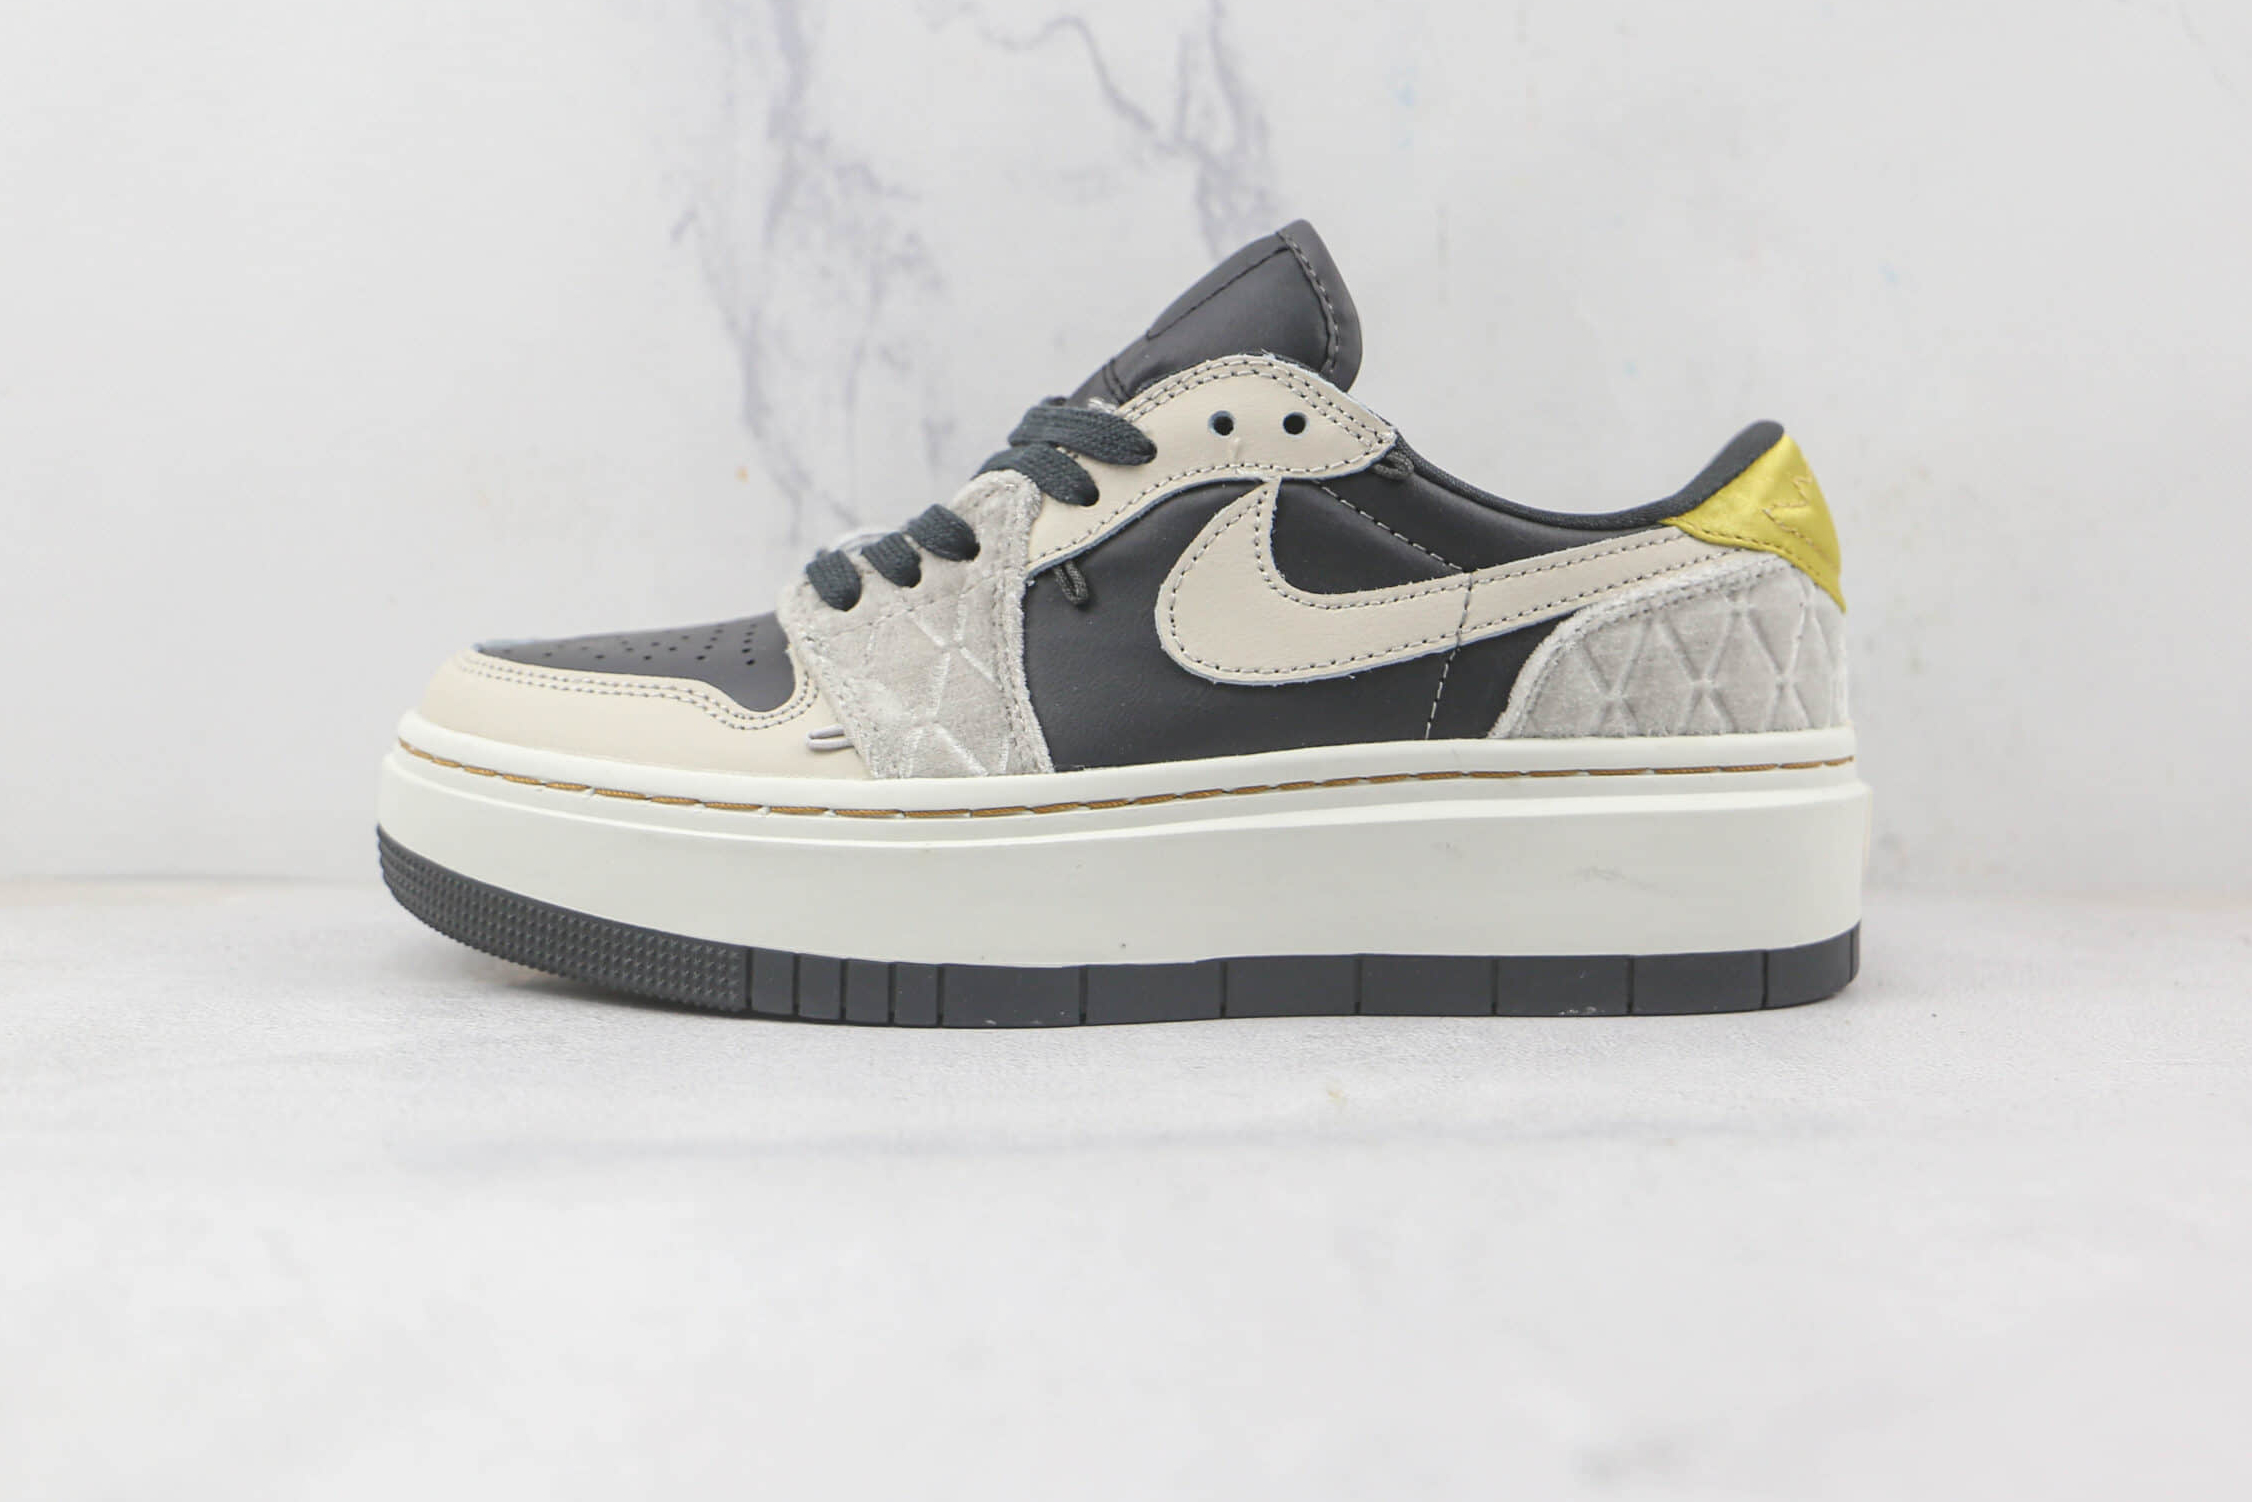 Air Jordan 1 Elevate Low SE 'Removable Beads' DV1494-001 | Stylish and Versatile Sneakers